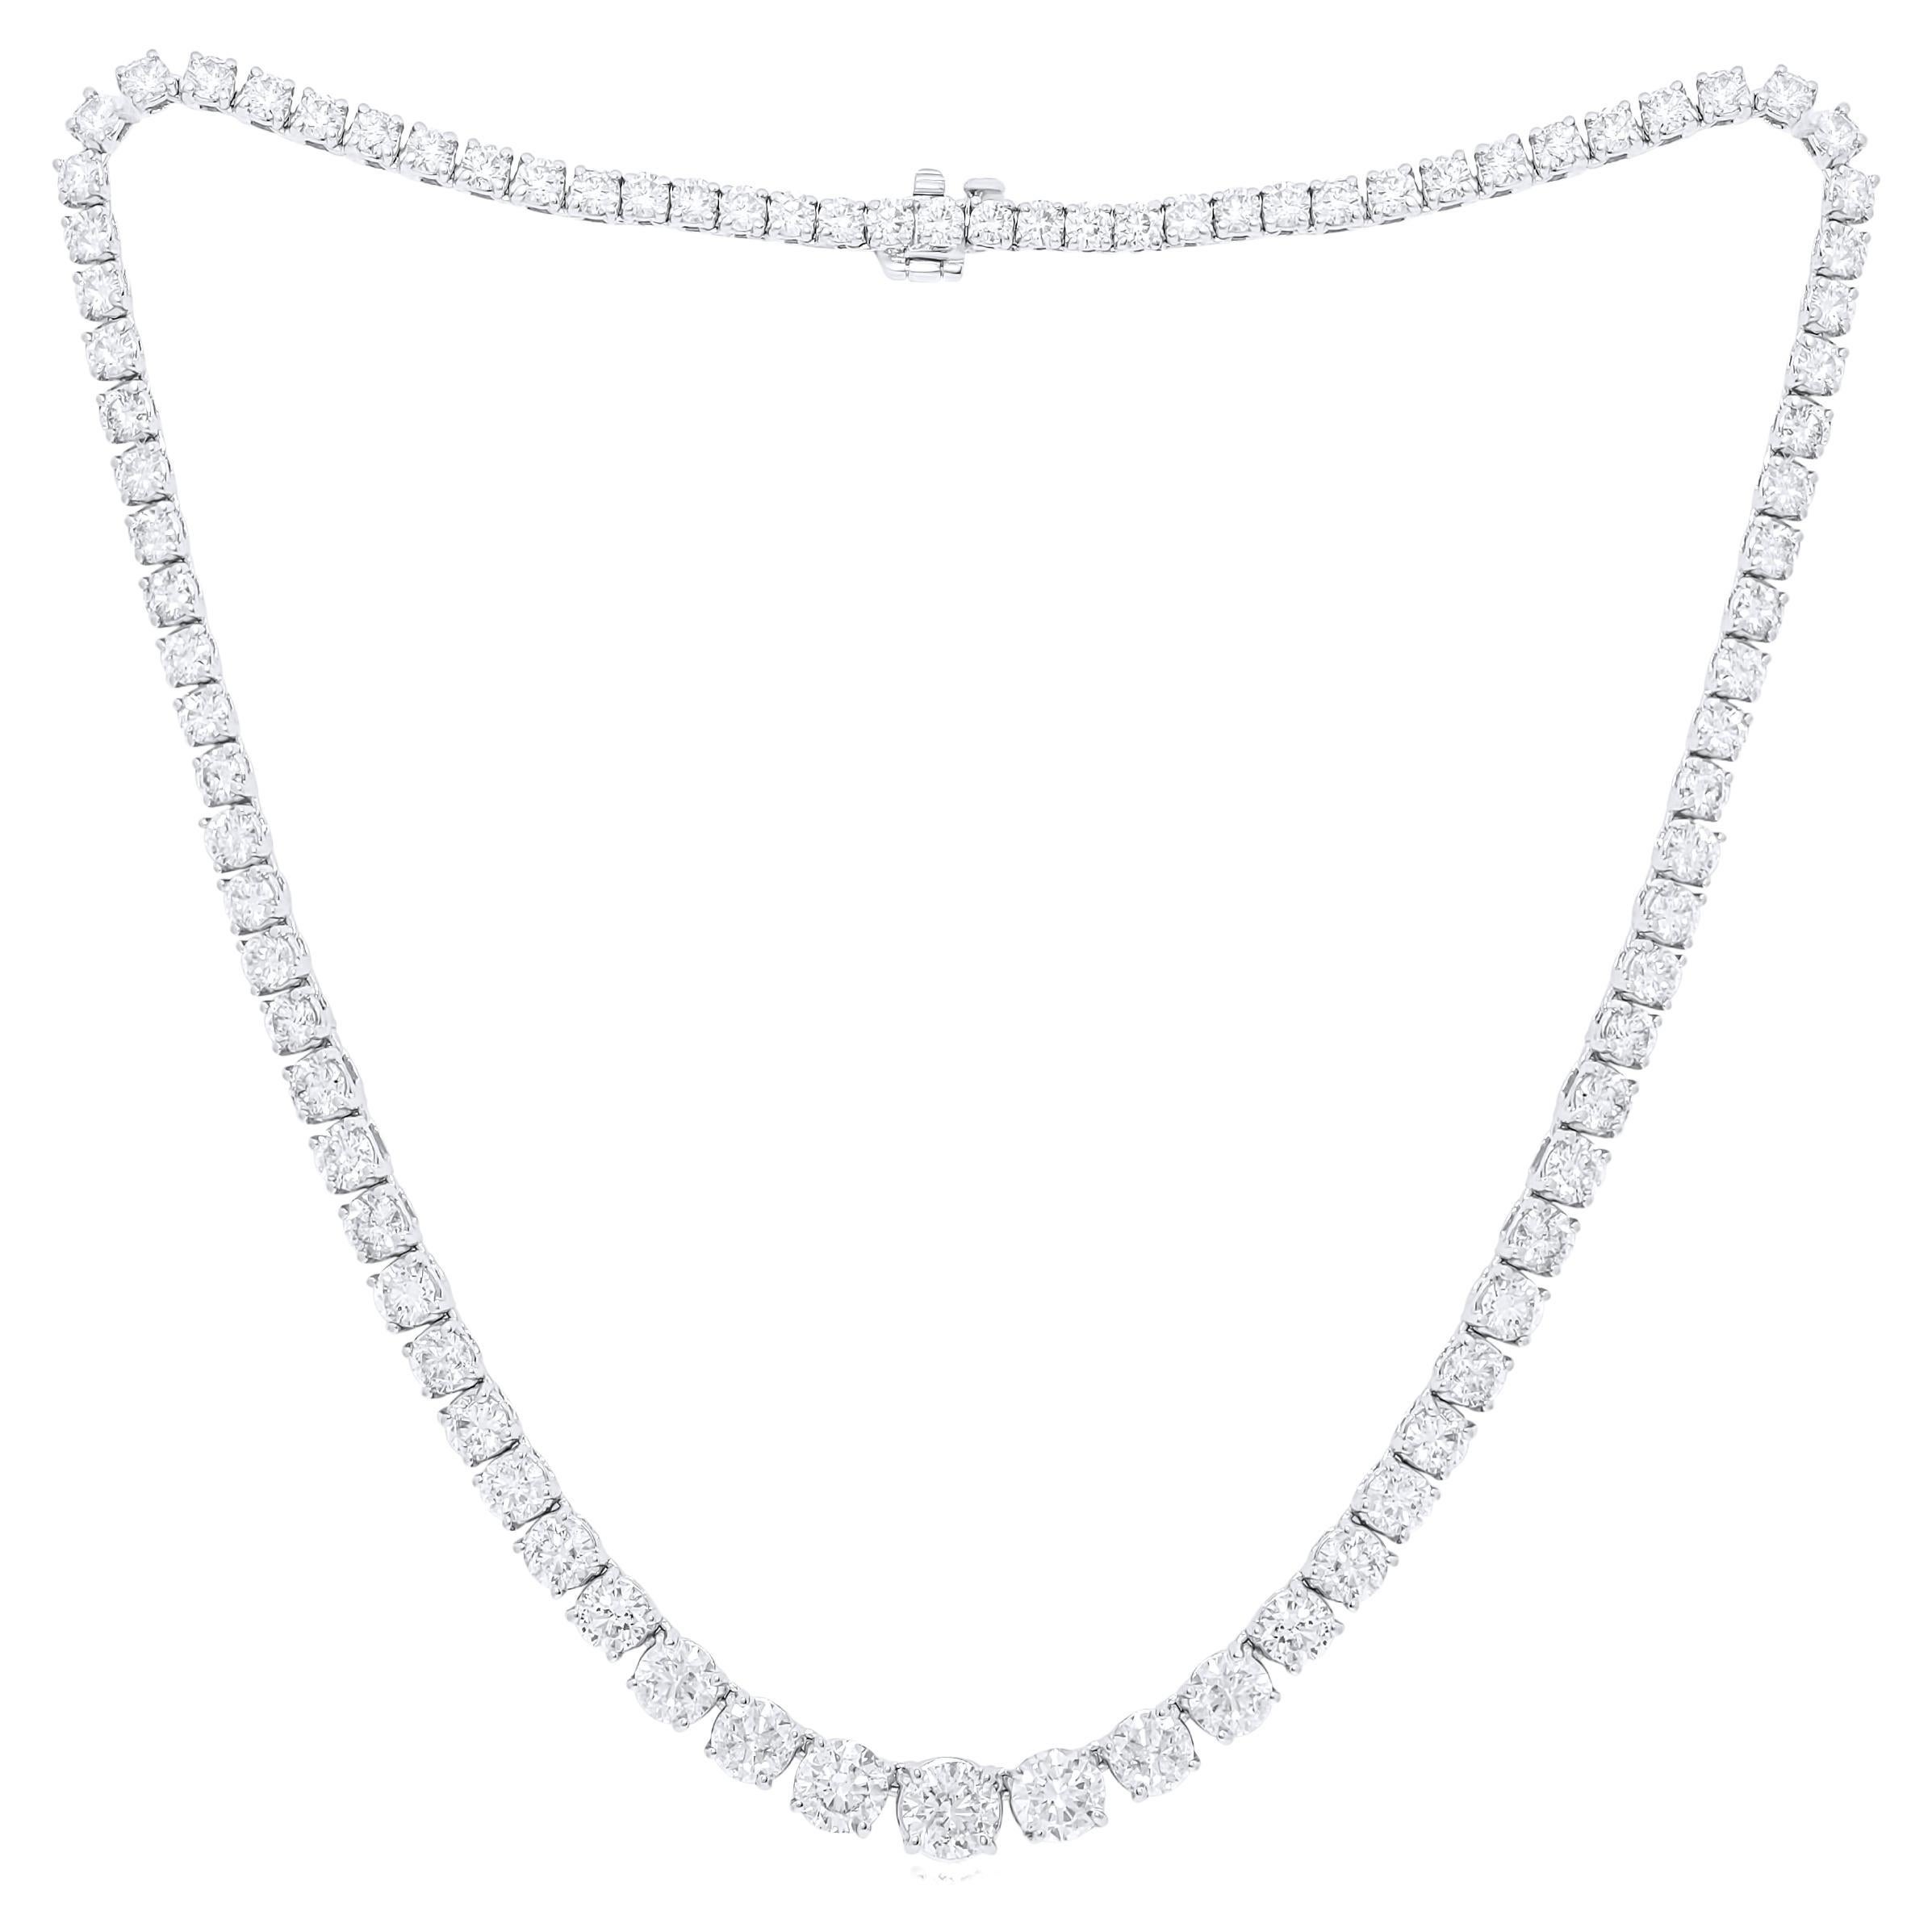 Diana M.18 kt white gold, 16" 4 prong diamond graduated tennis necklace 25cts